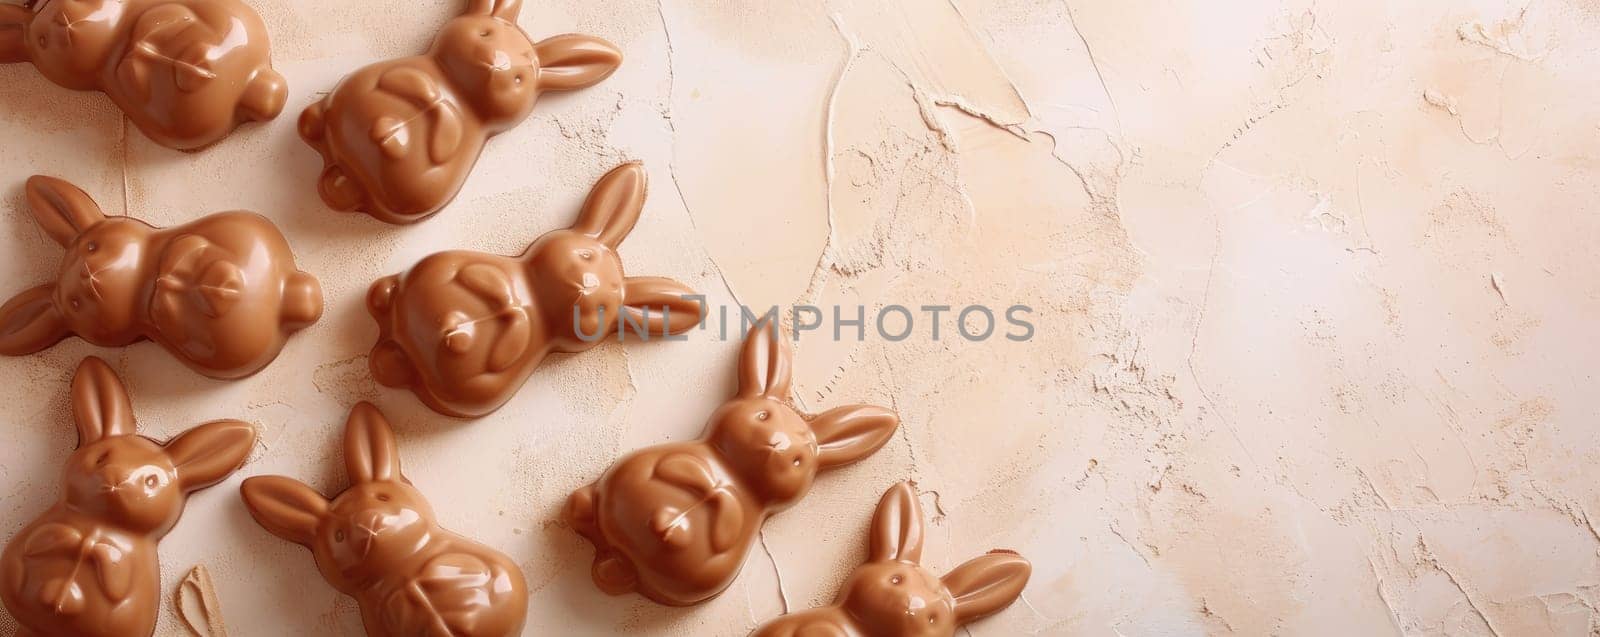 Easter chocolate bunnies on a light background